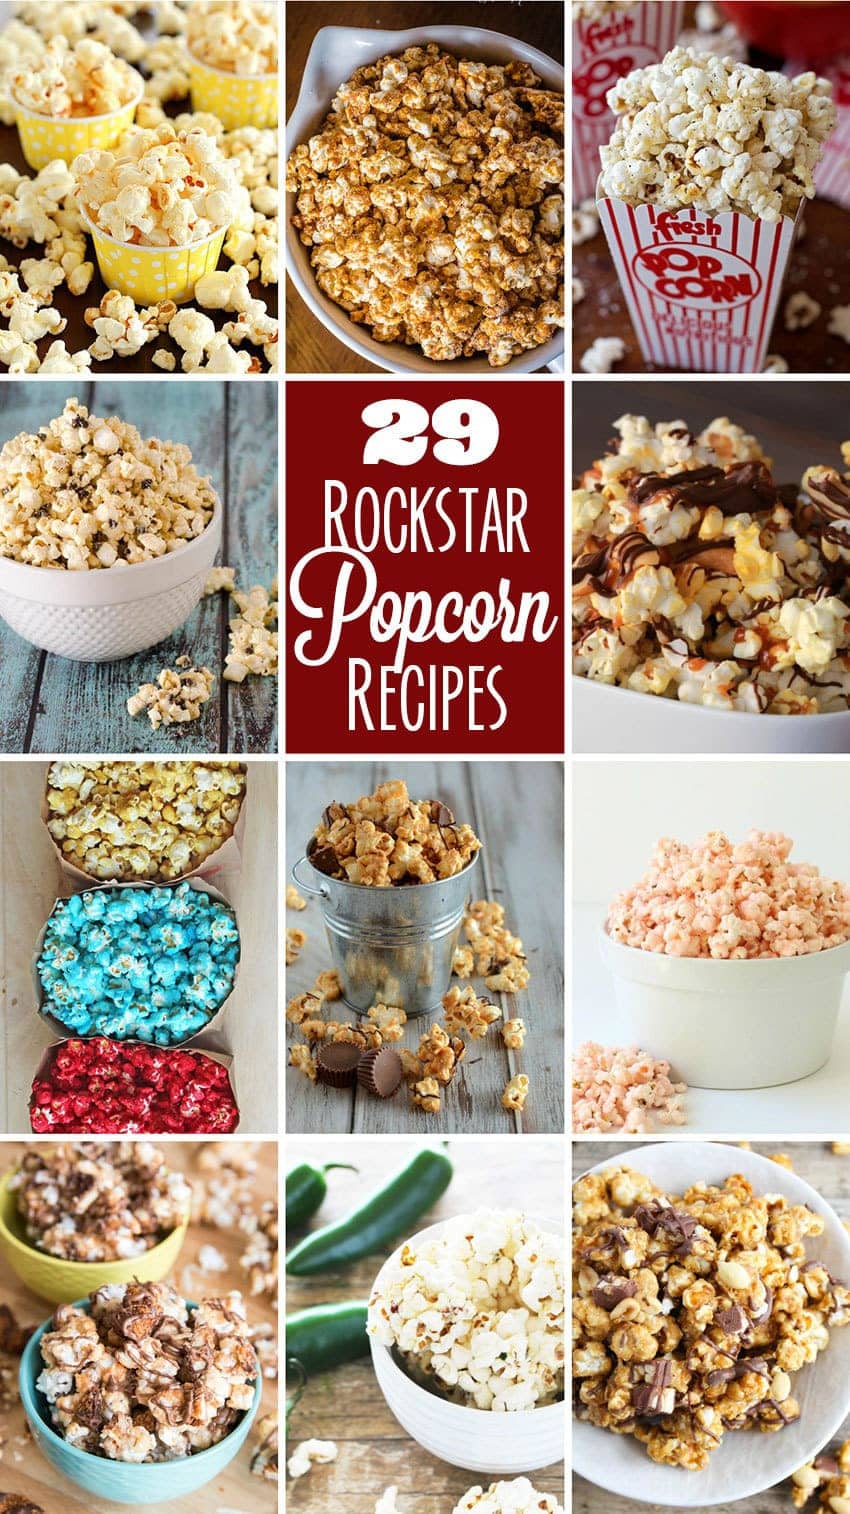 Rockstar Popcorn Recipes - Butter With A Side of Bread